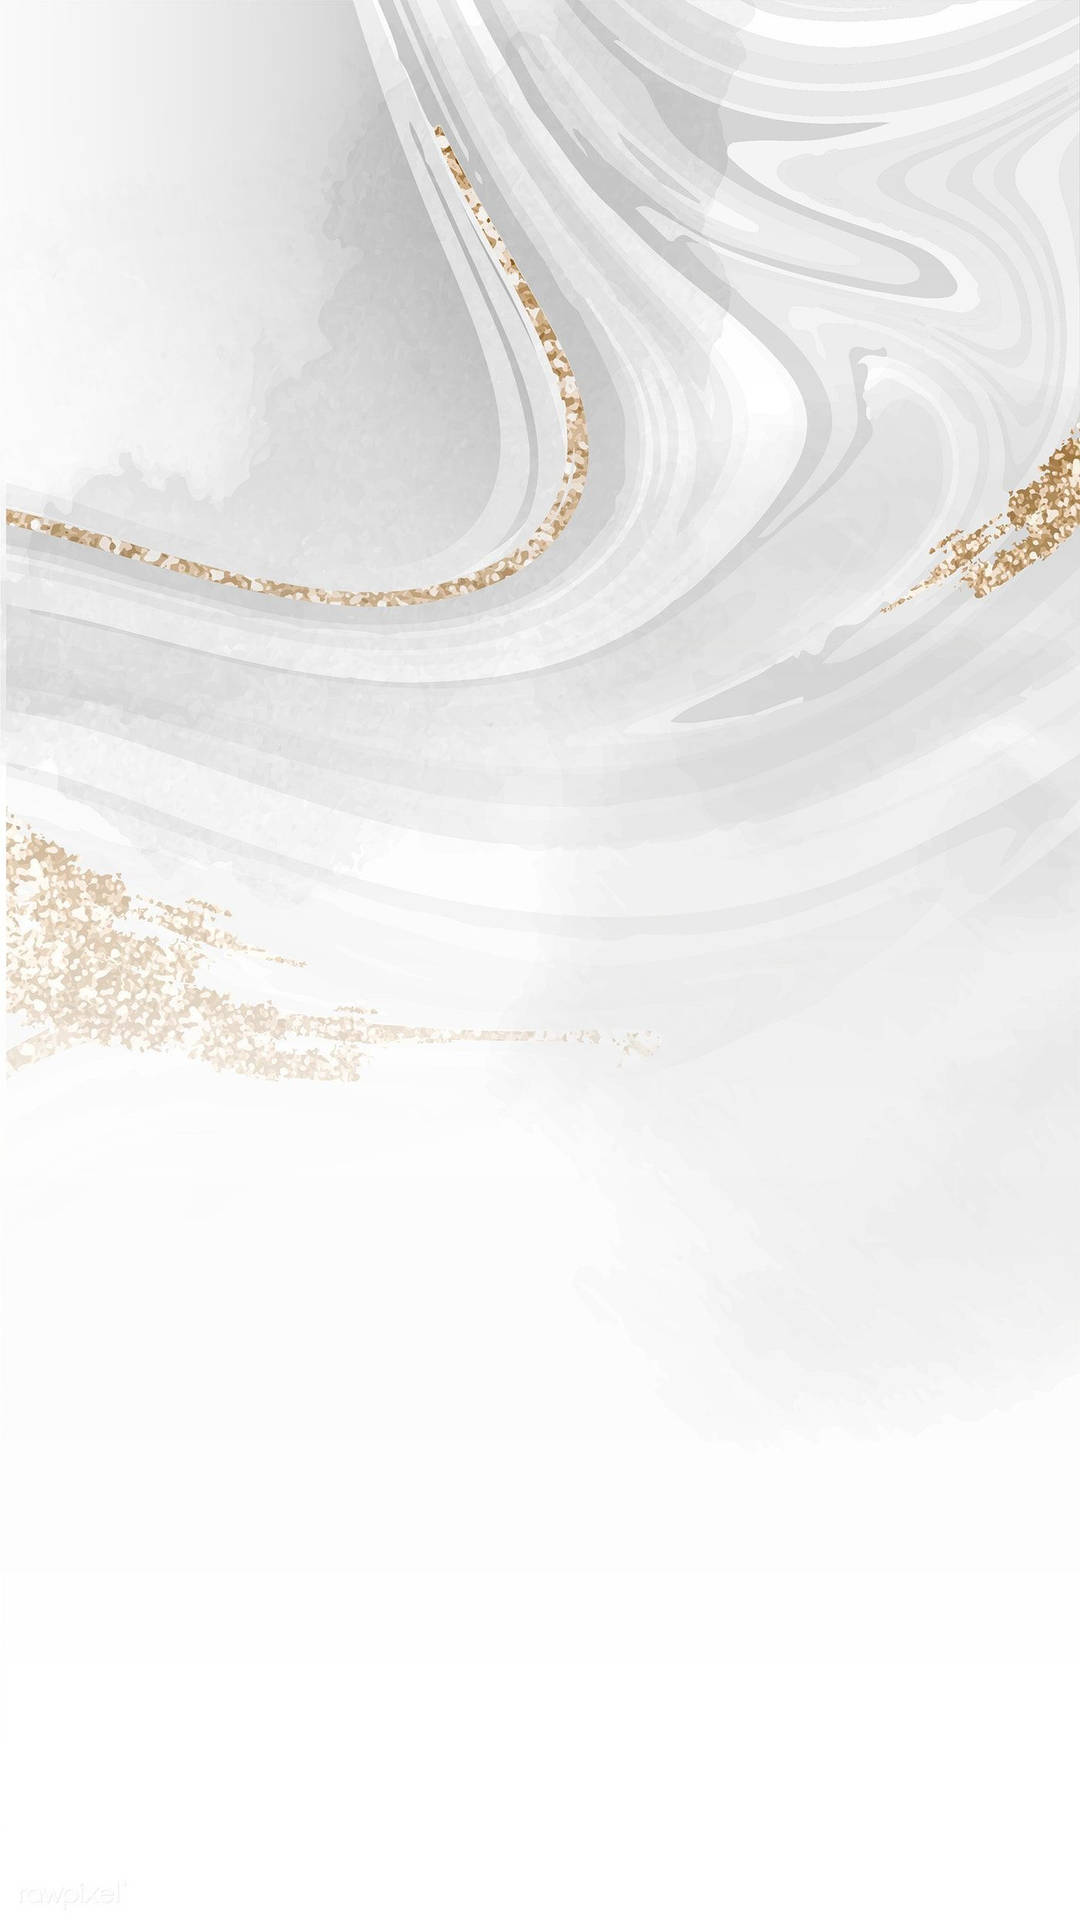 Flowing White And Gold Background Wallpaper